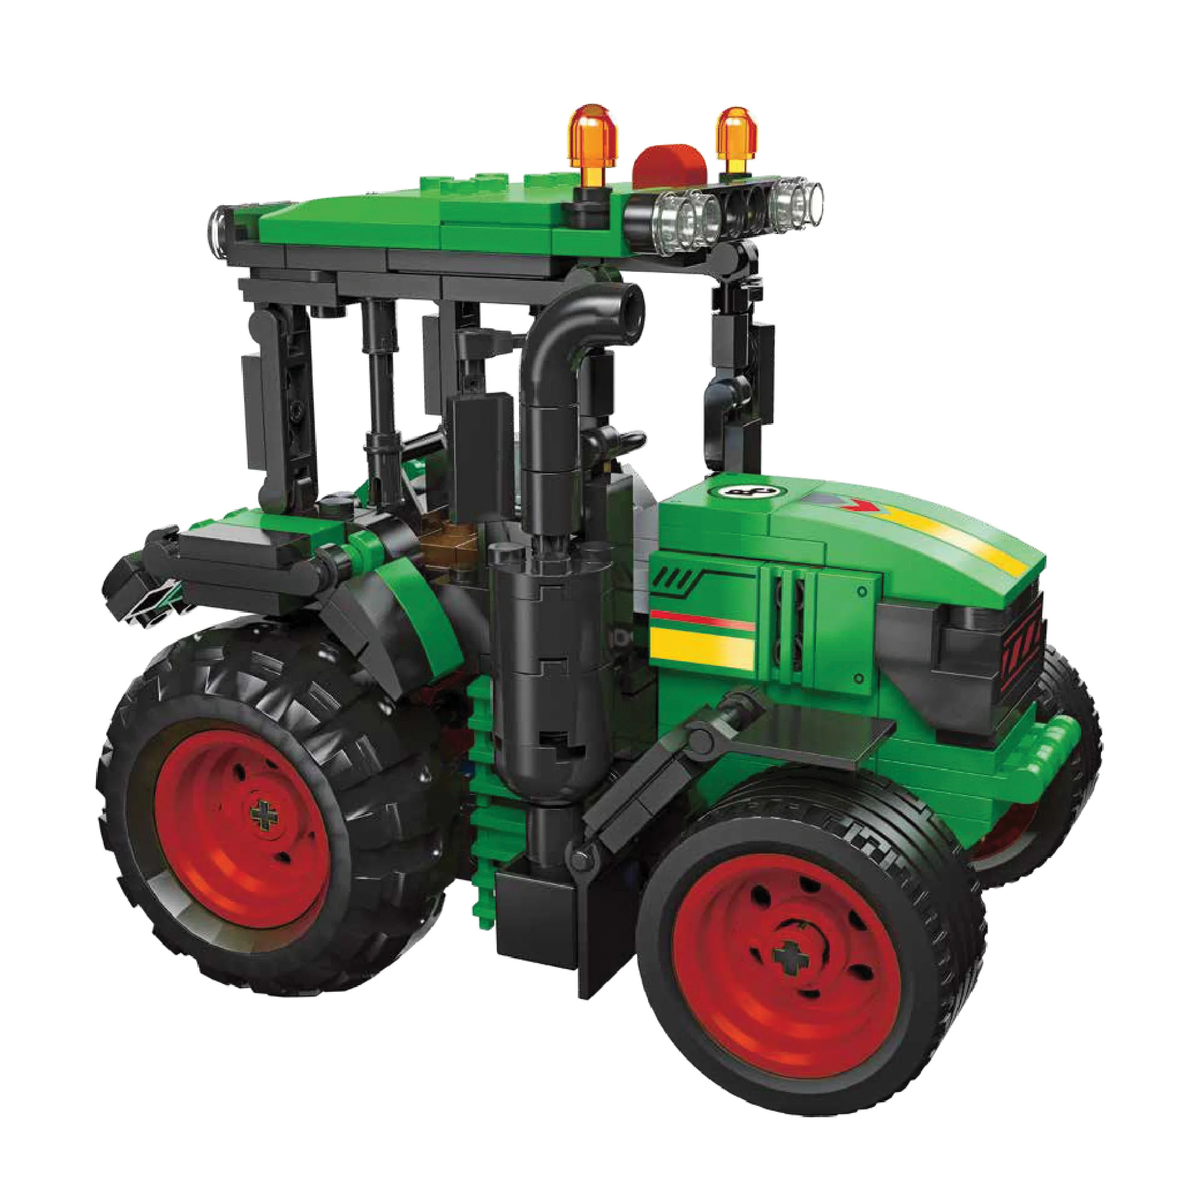 Big Country Toys Building Blocks - Tractor